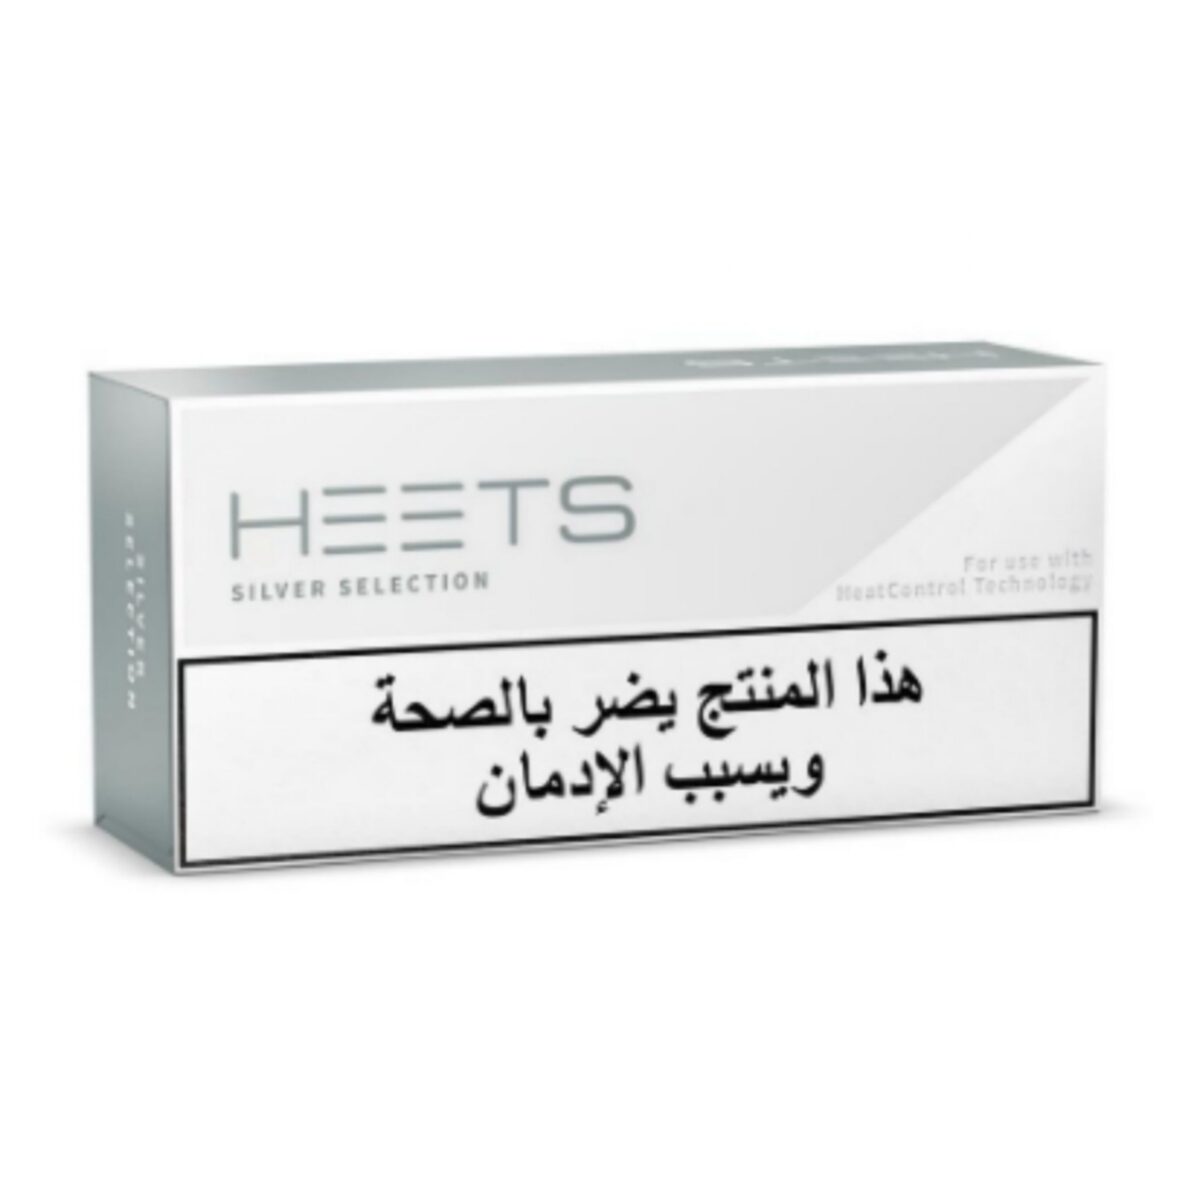 IQOS Heets Silver Selection Arabic from Lebanon